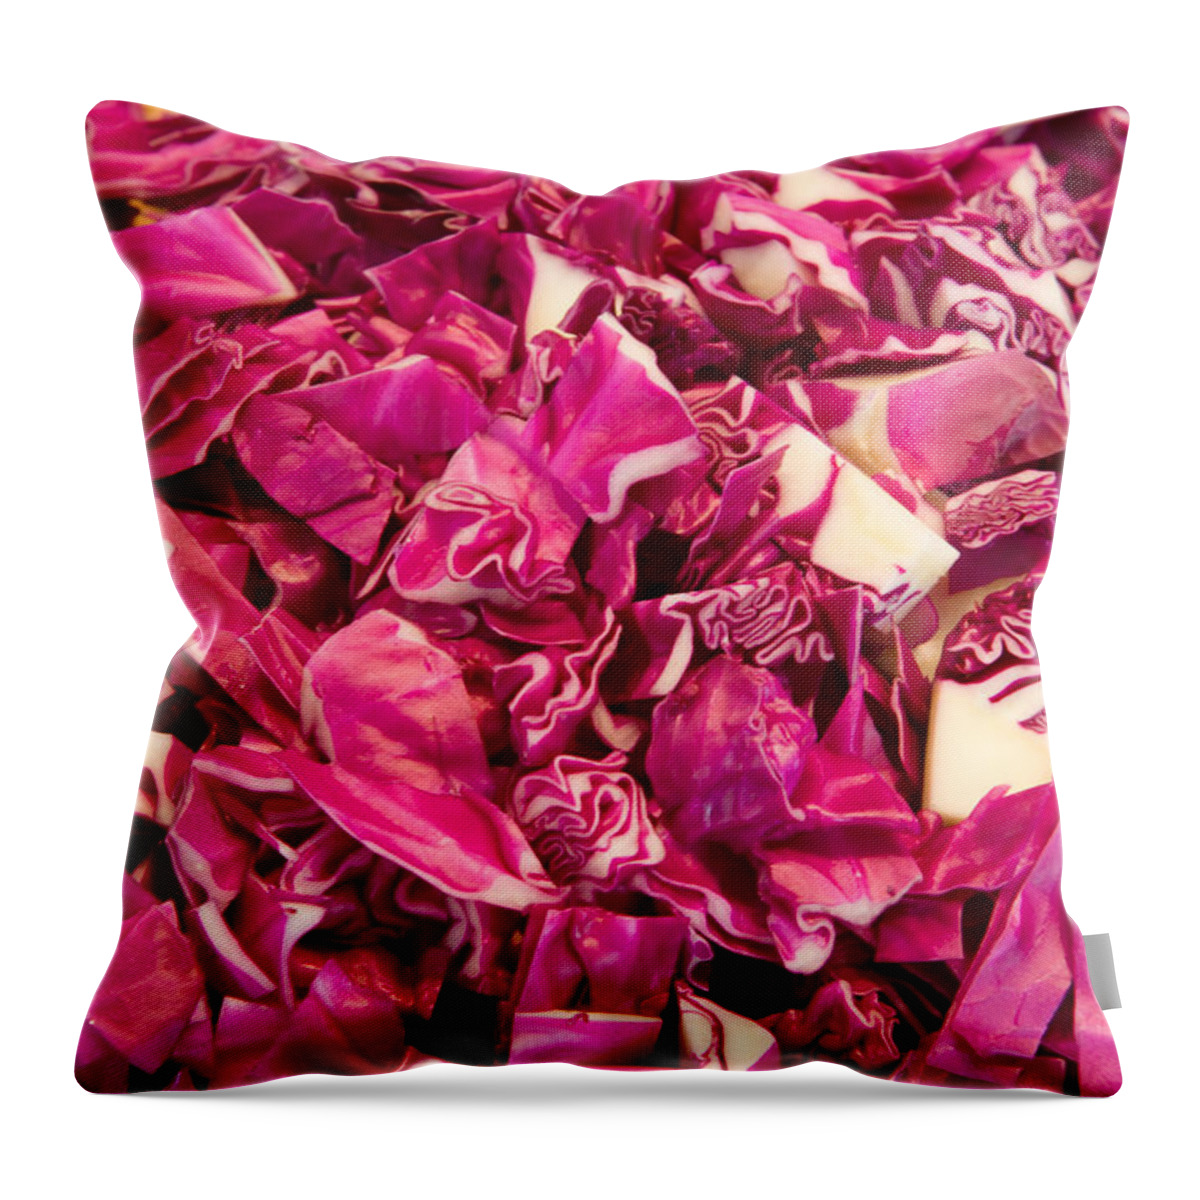 Food Throw Pillow featuring the photograph Cabbage 639 by Michael Fryd